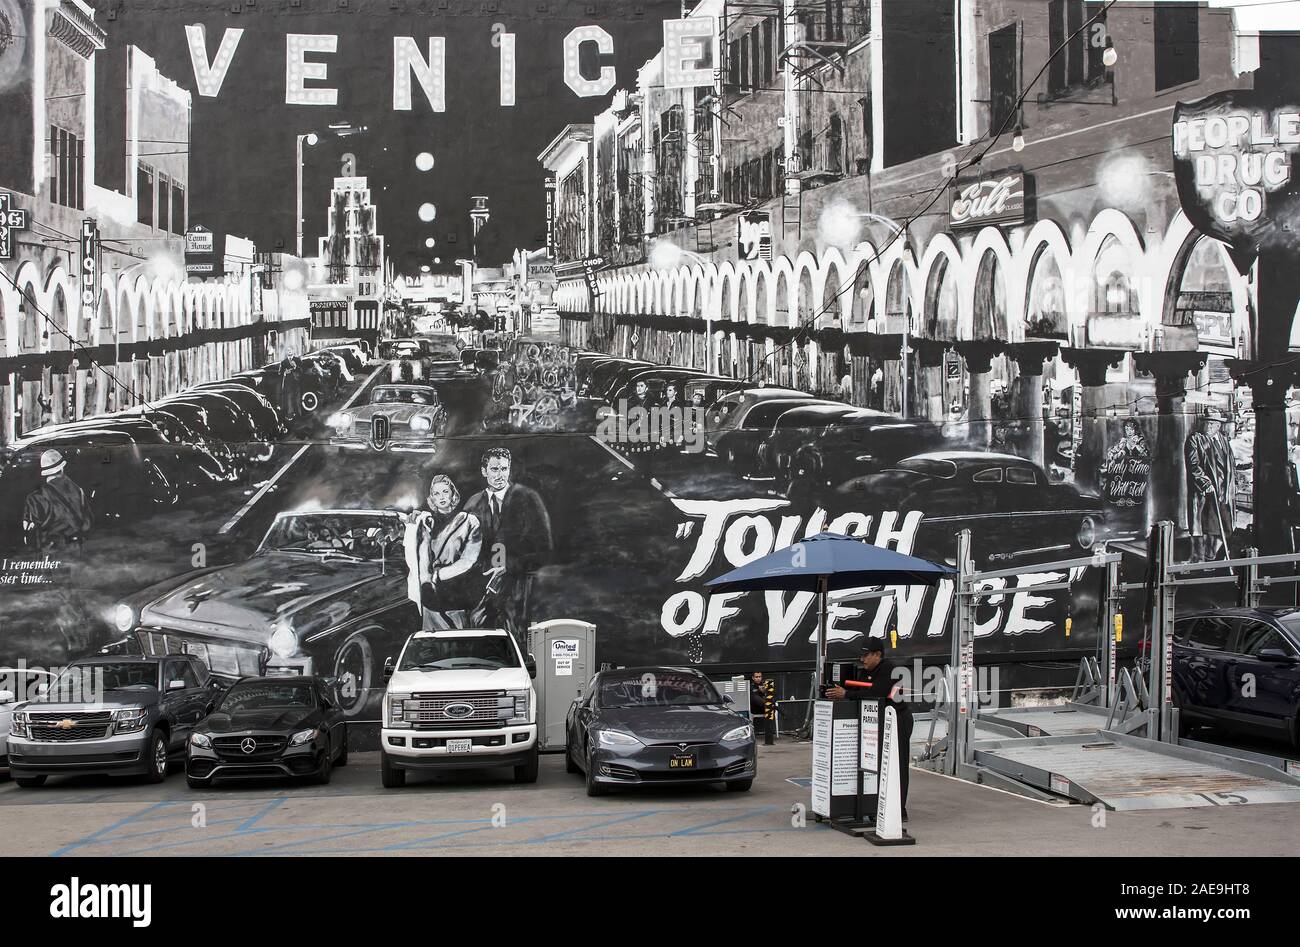 'A Touch of Venice' mural in Venice, Los Angeles. California, USA Stock Photo